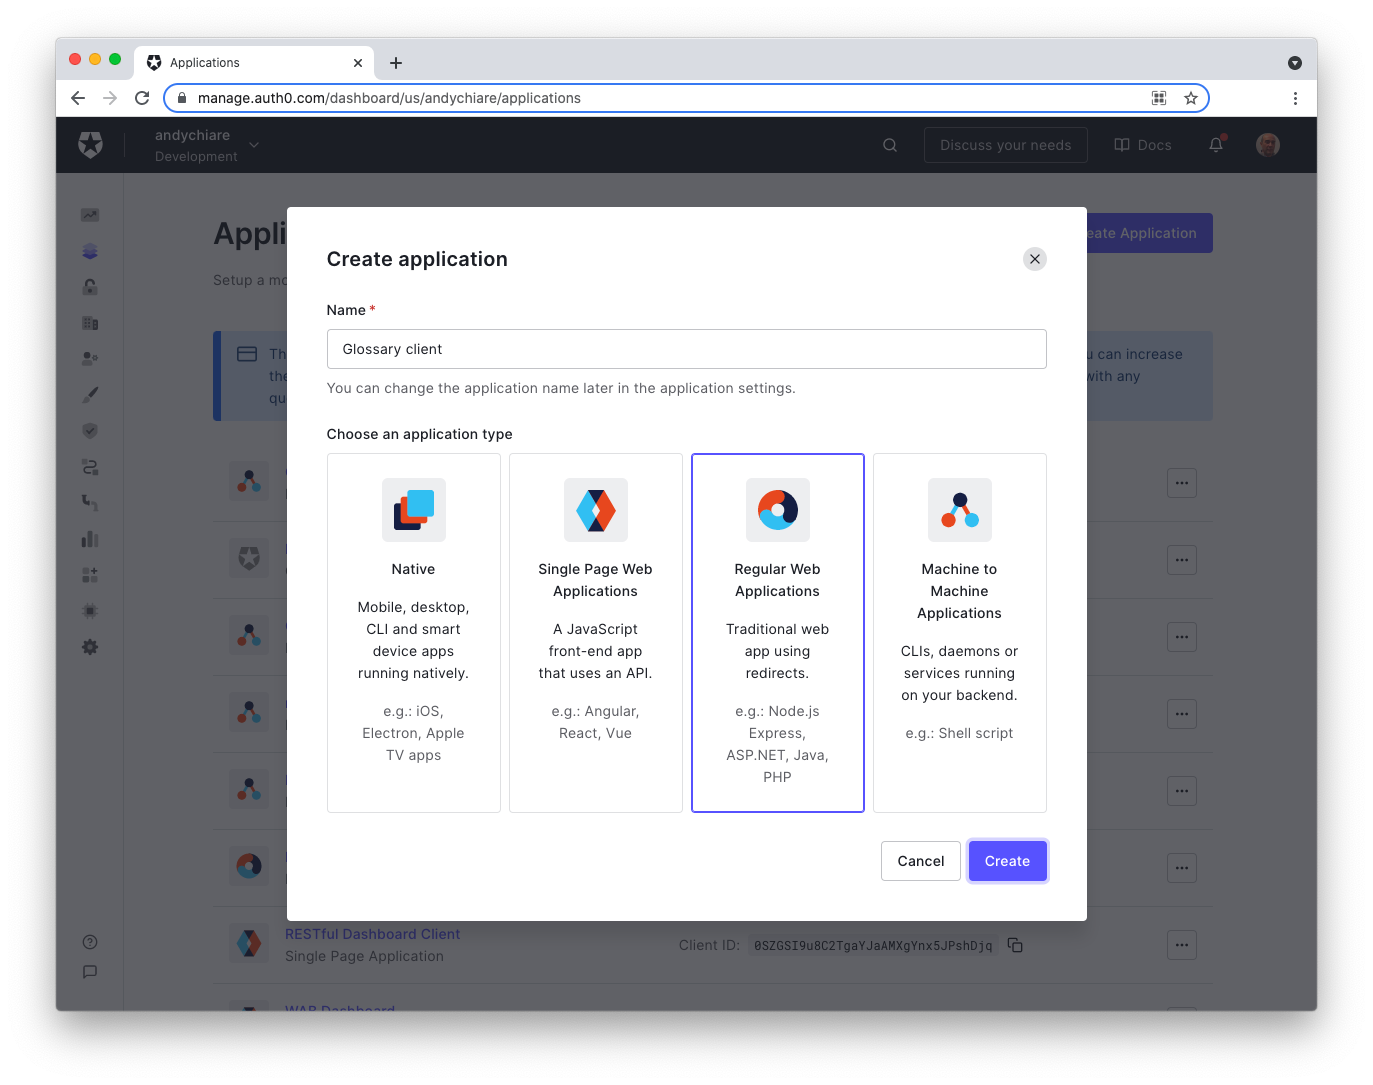 Register the glossary client with Auth0